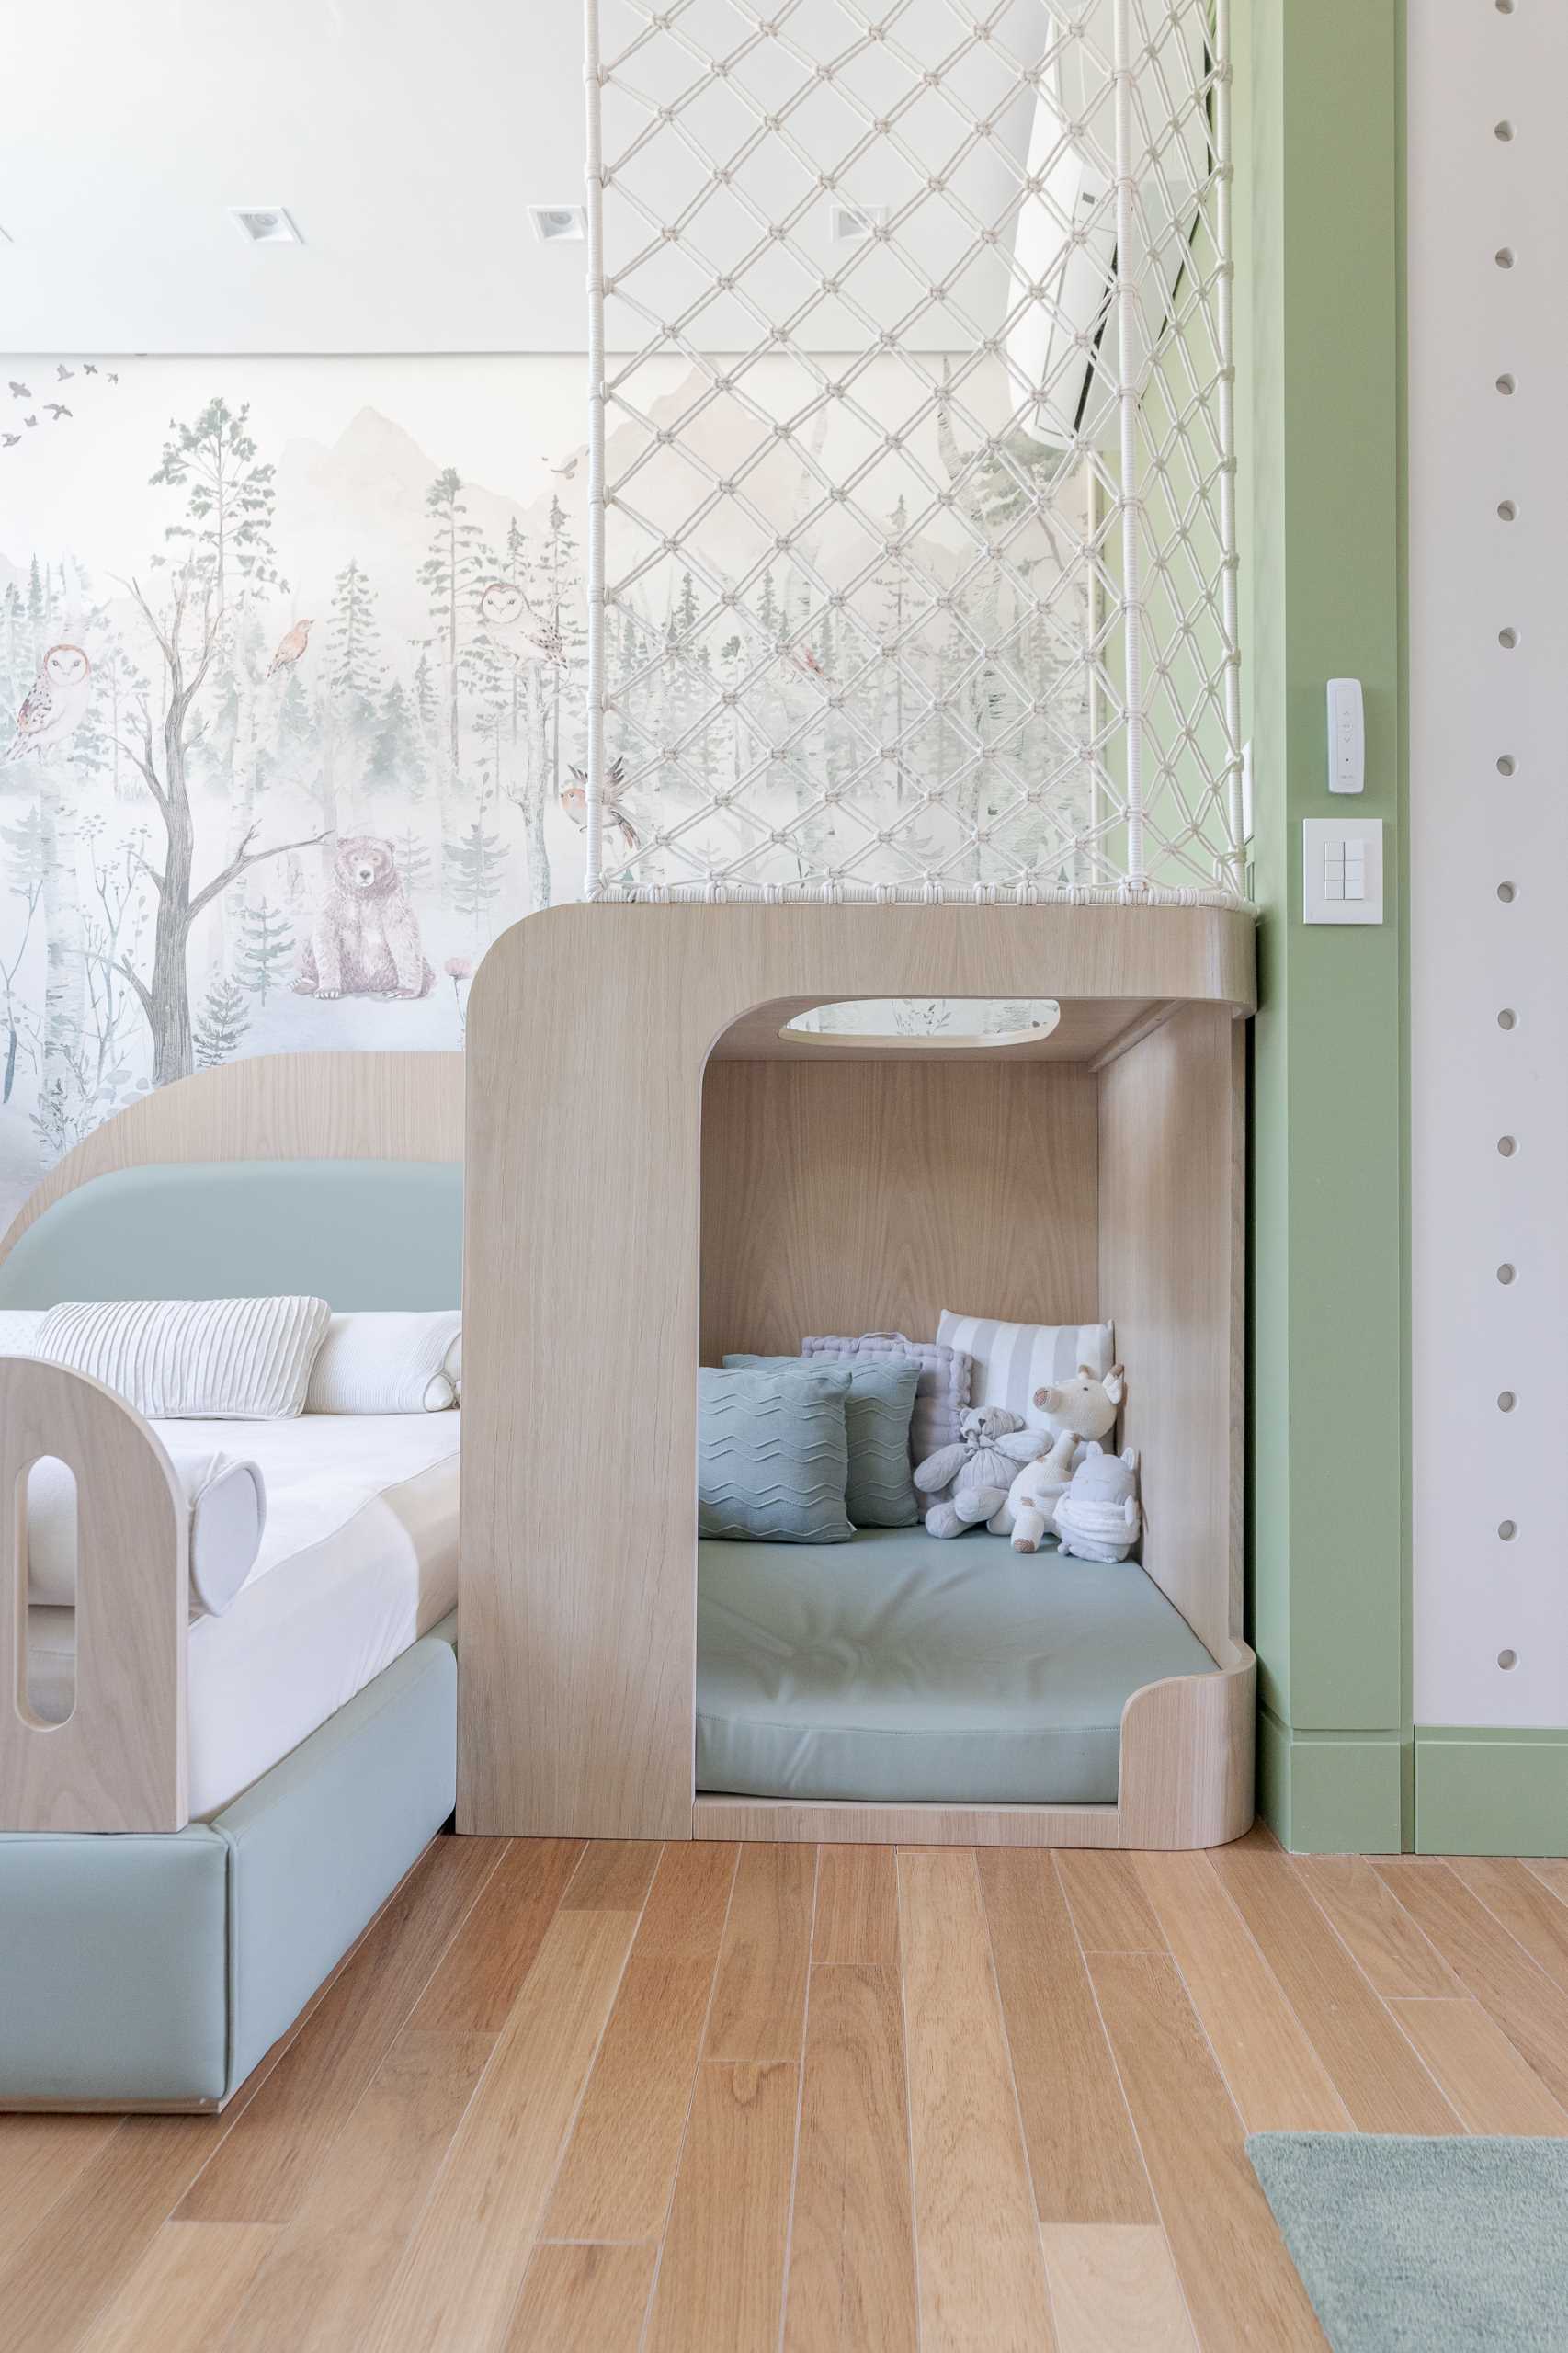 In this modern kid's bedroom, there's a woodland mural on the wall, a small reading nook, a pegboard wall, and storage cabinet for toys.